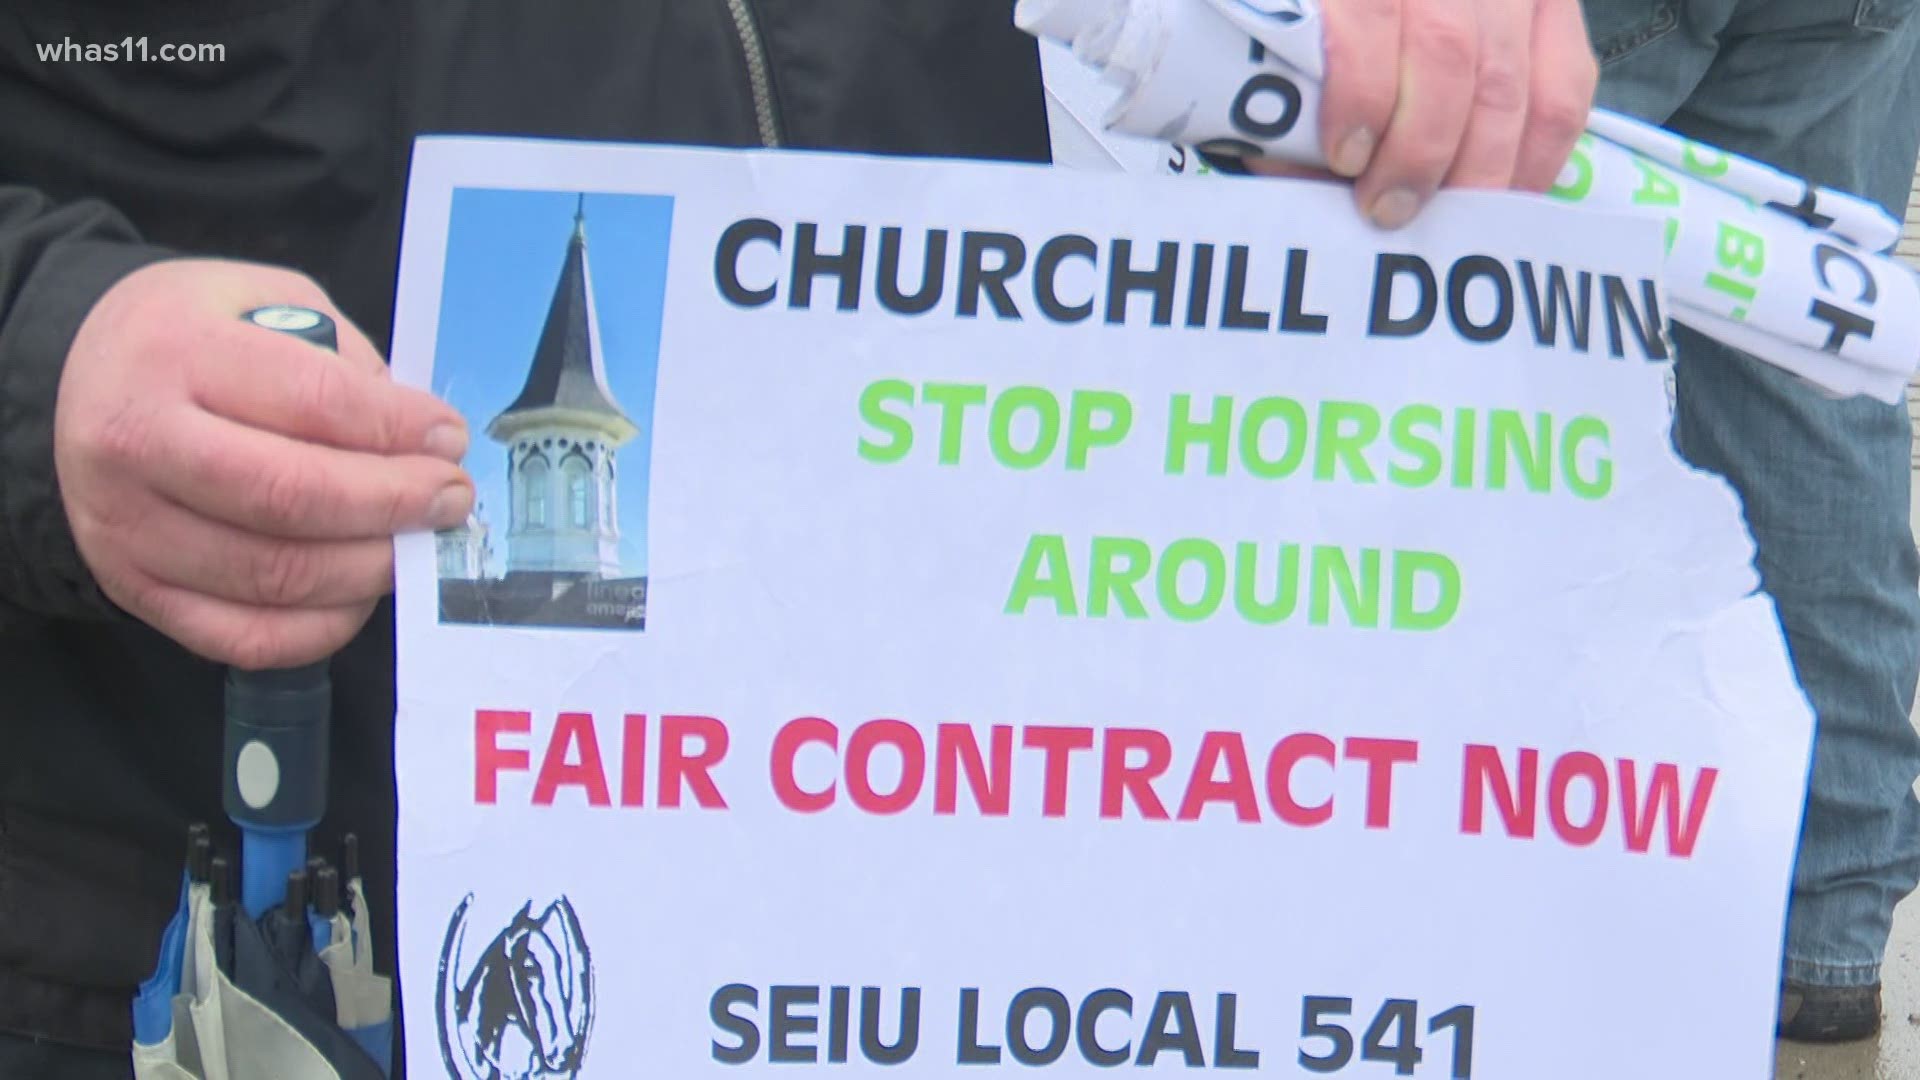 The valets gathered outside the racing facility to demand better wages after Churchill canceled negotiations last week.